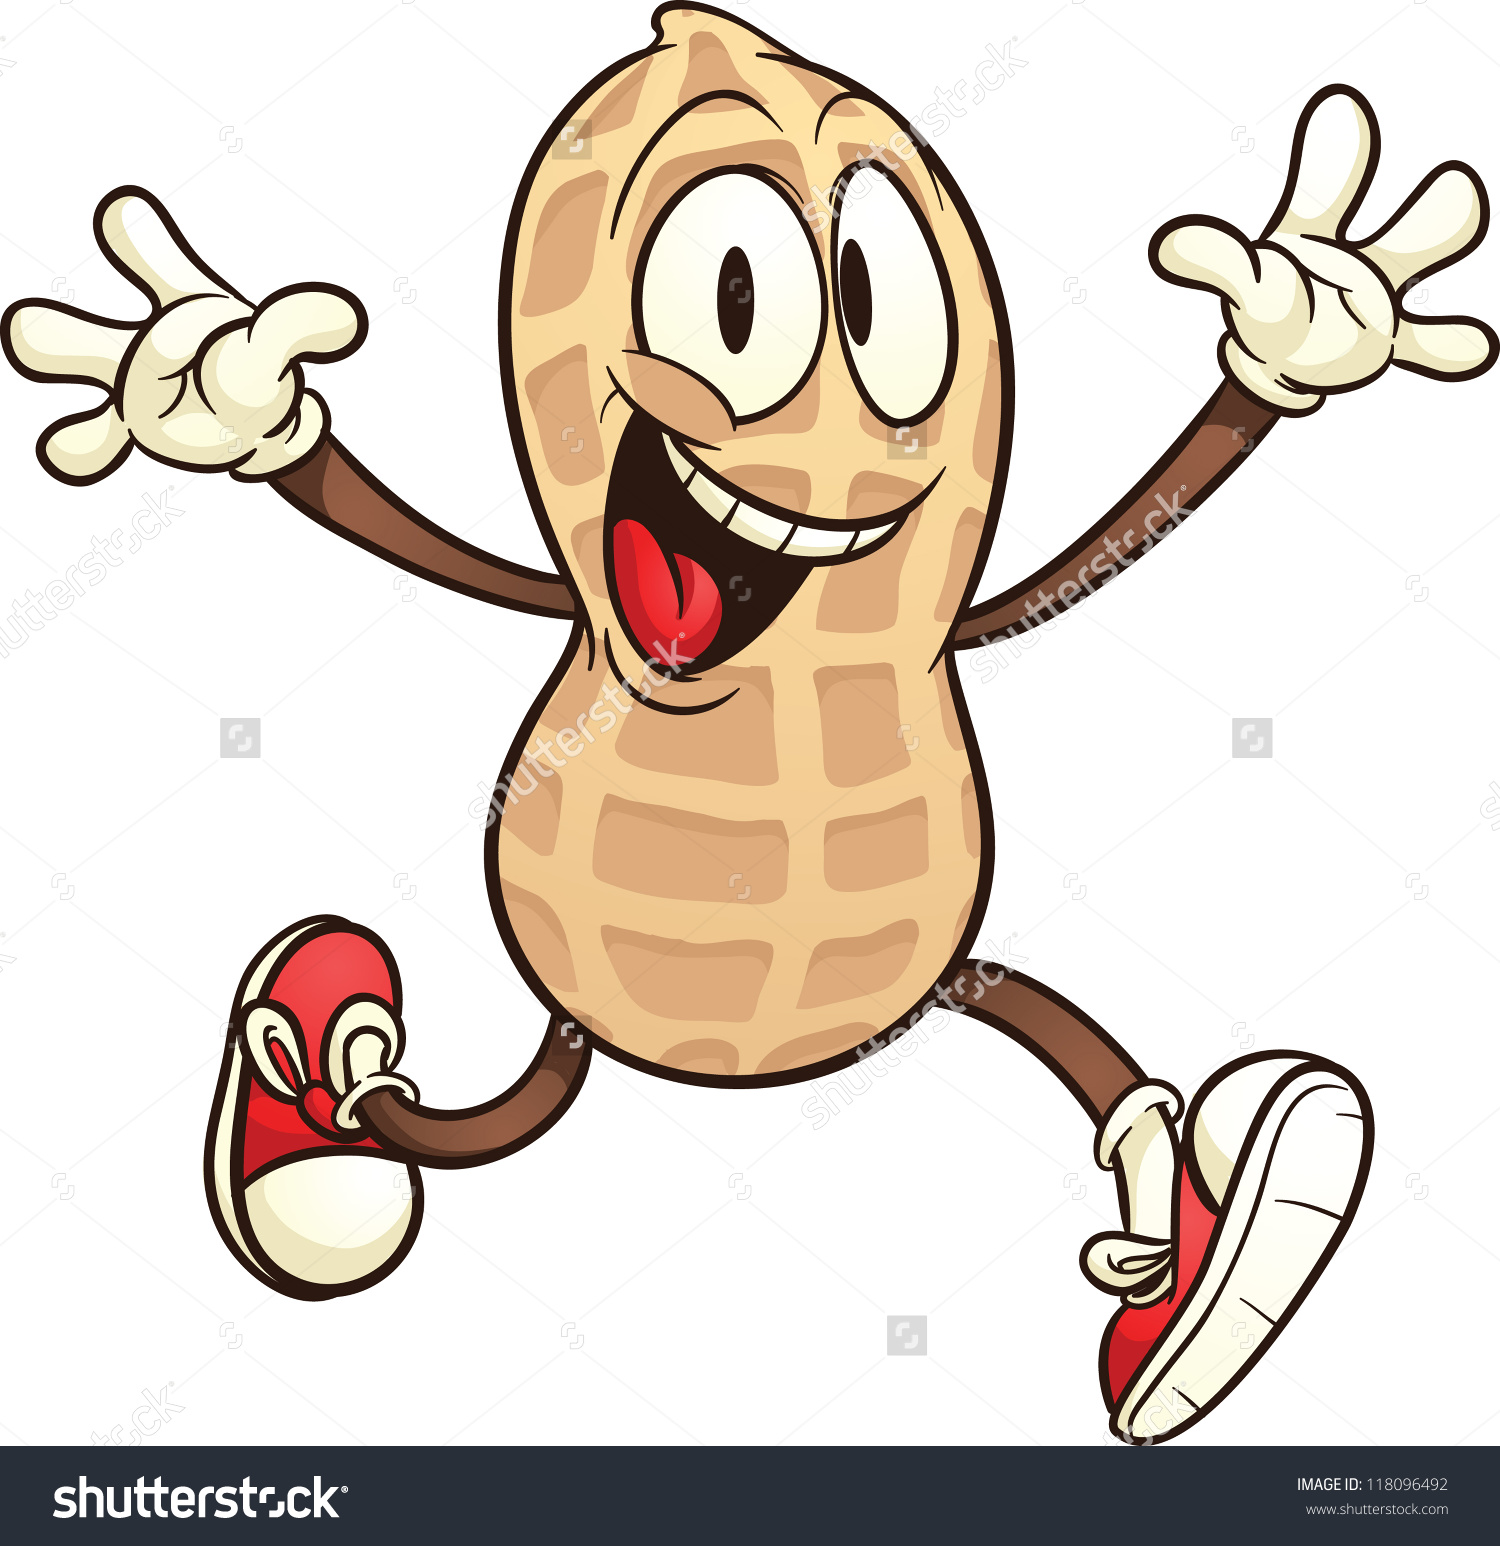 Cute cartoon peanut. Vector clip art illustration with simple gradients. All in a single